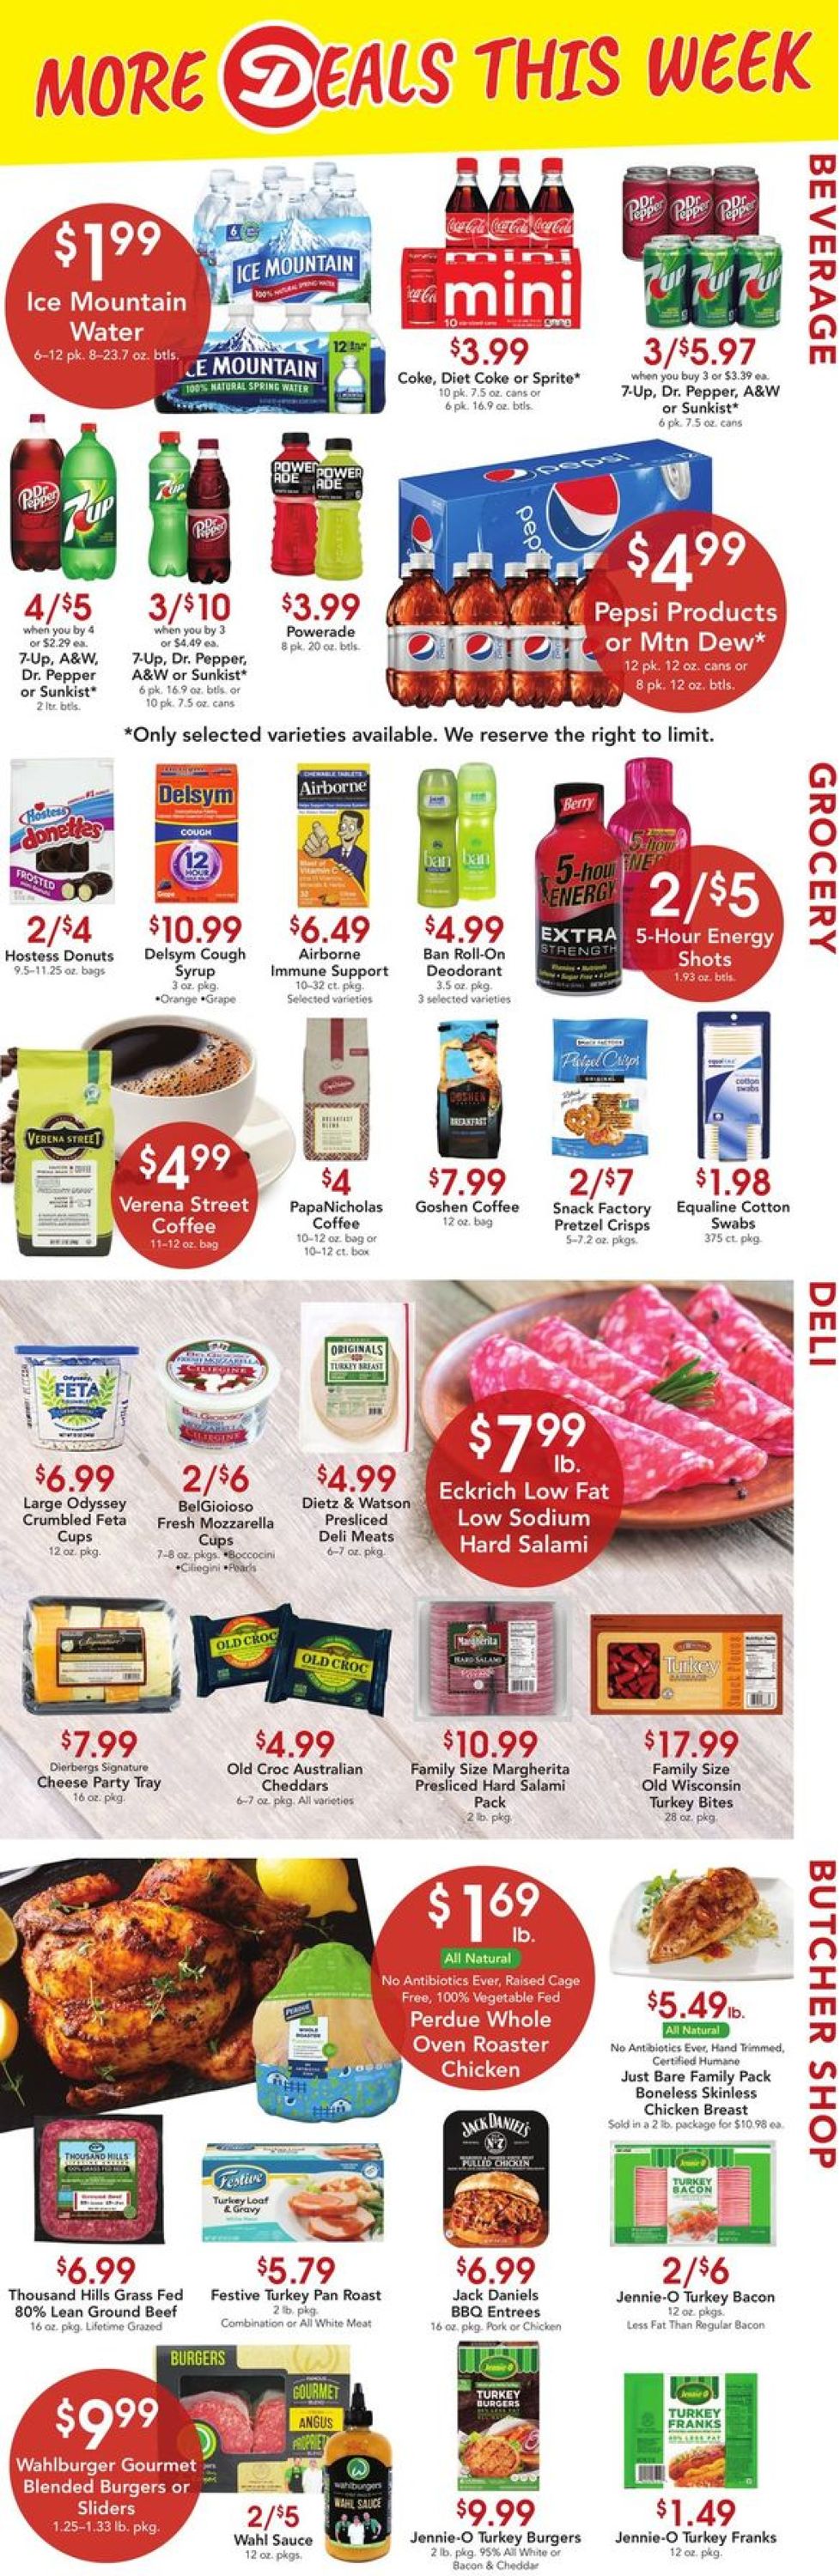 Catalogue Dierbergs from 02/23/2021